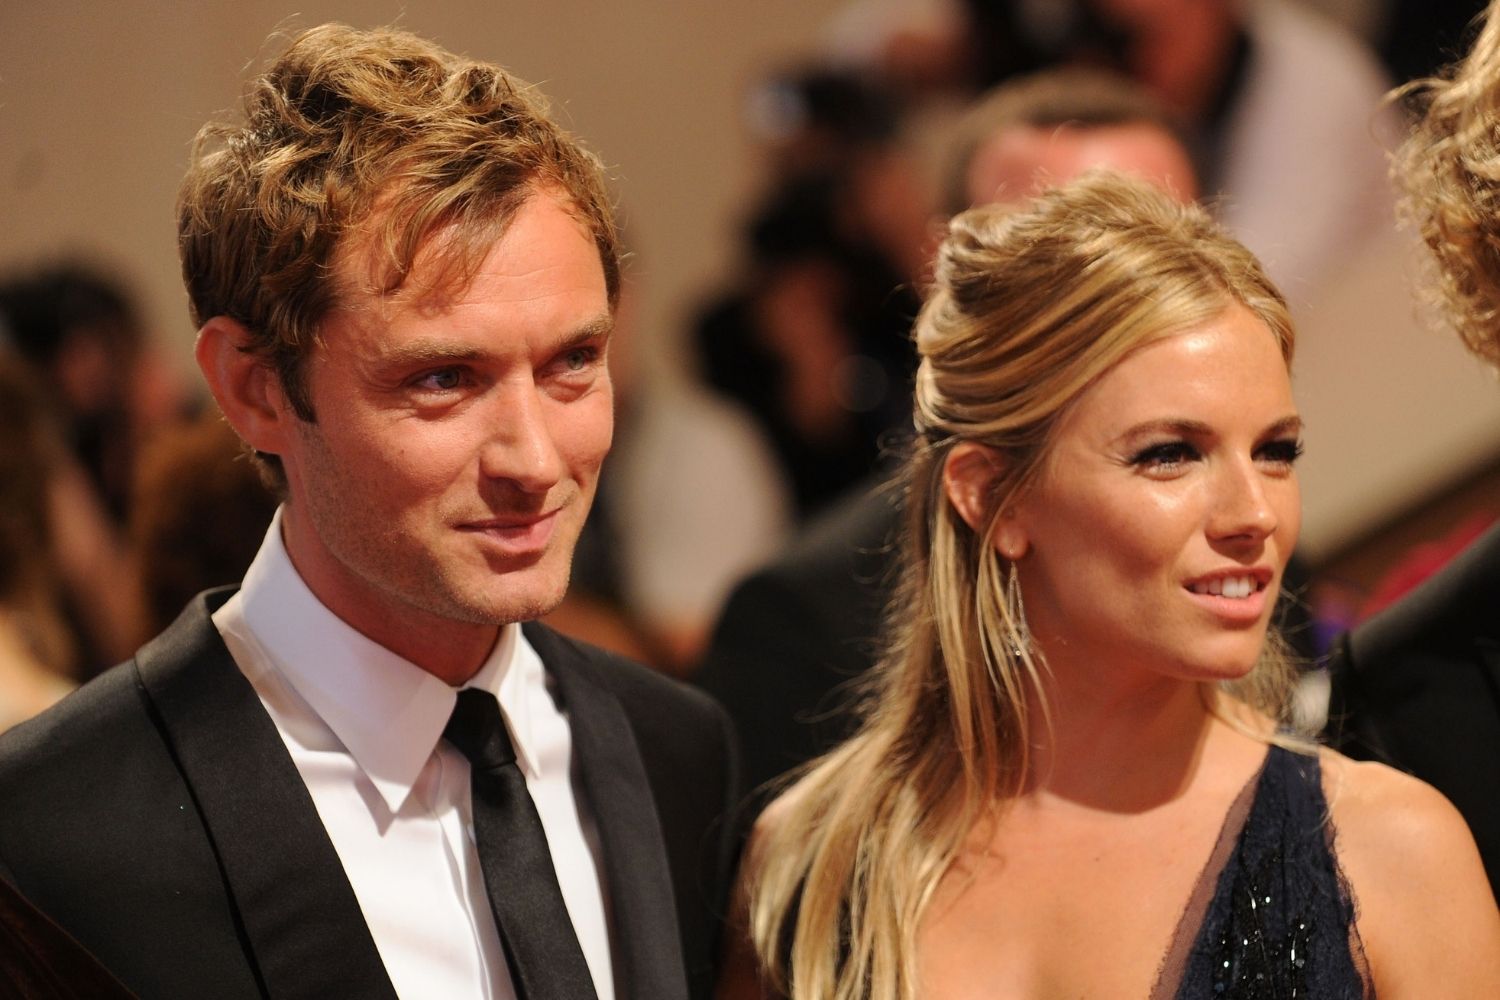 How Sienna Miller Overcame The ‘Humiliation’ Of Jude Law’s Cheating Scandal